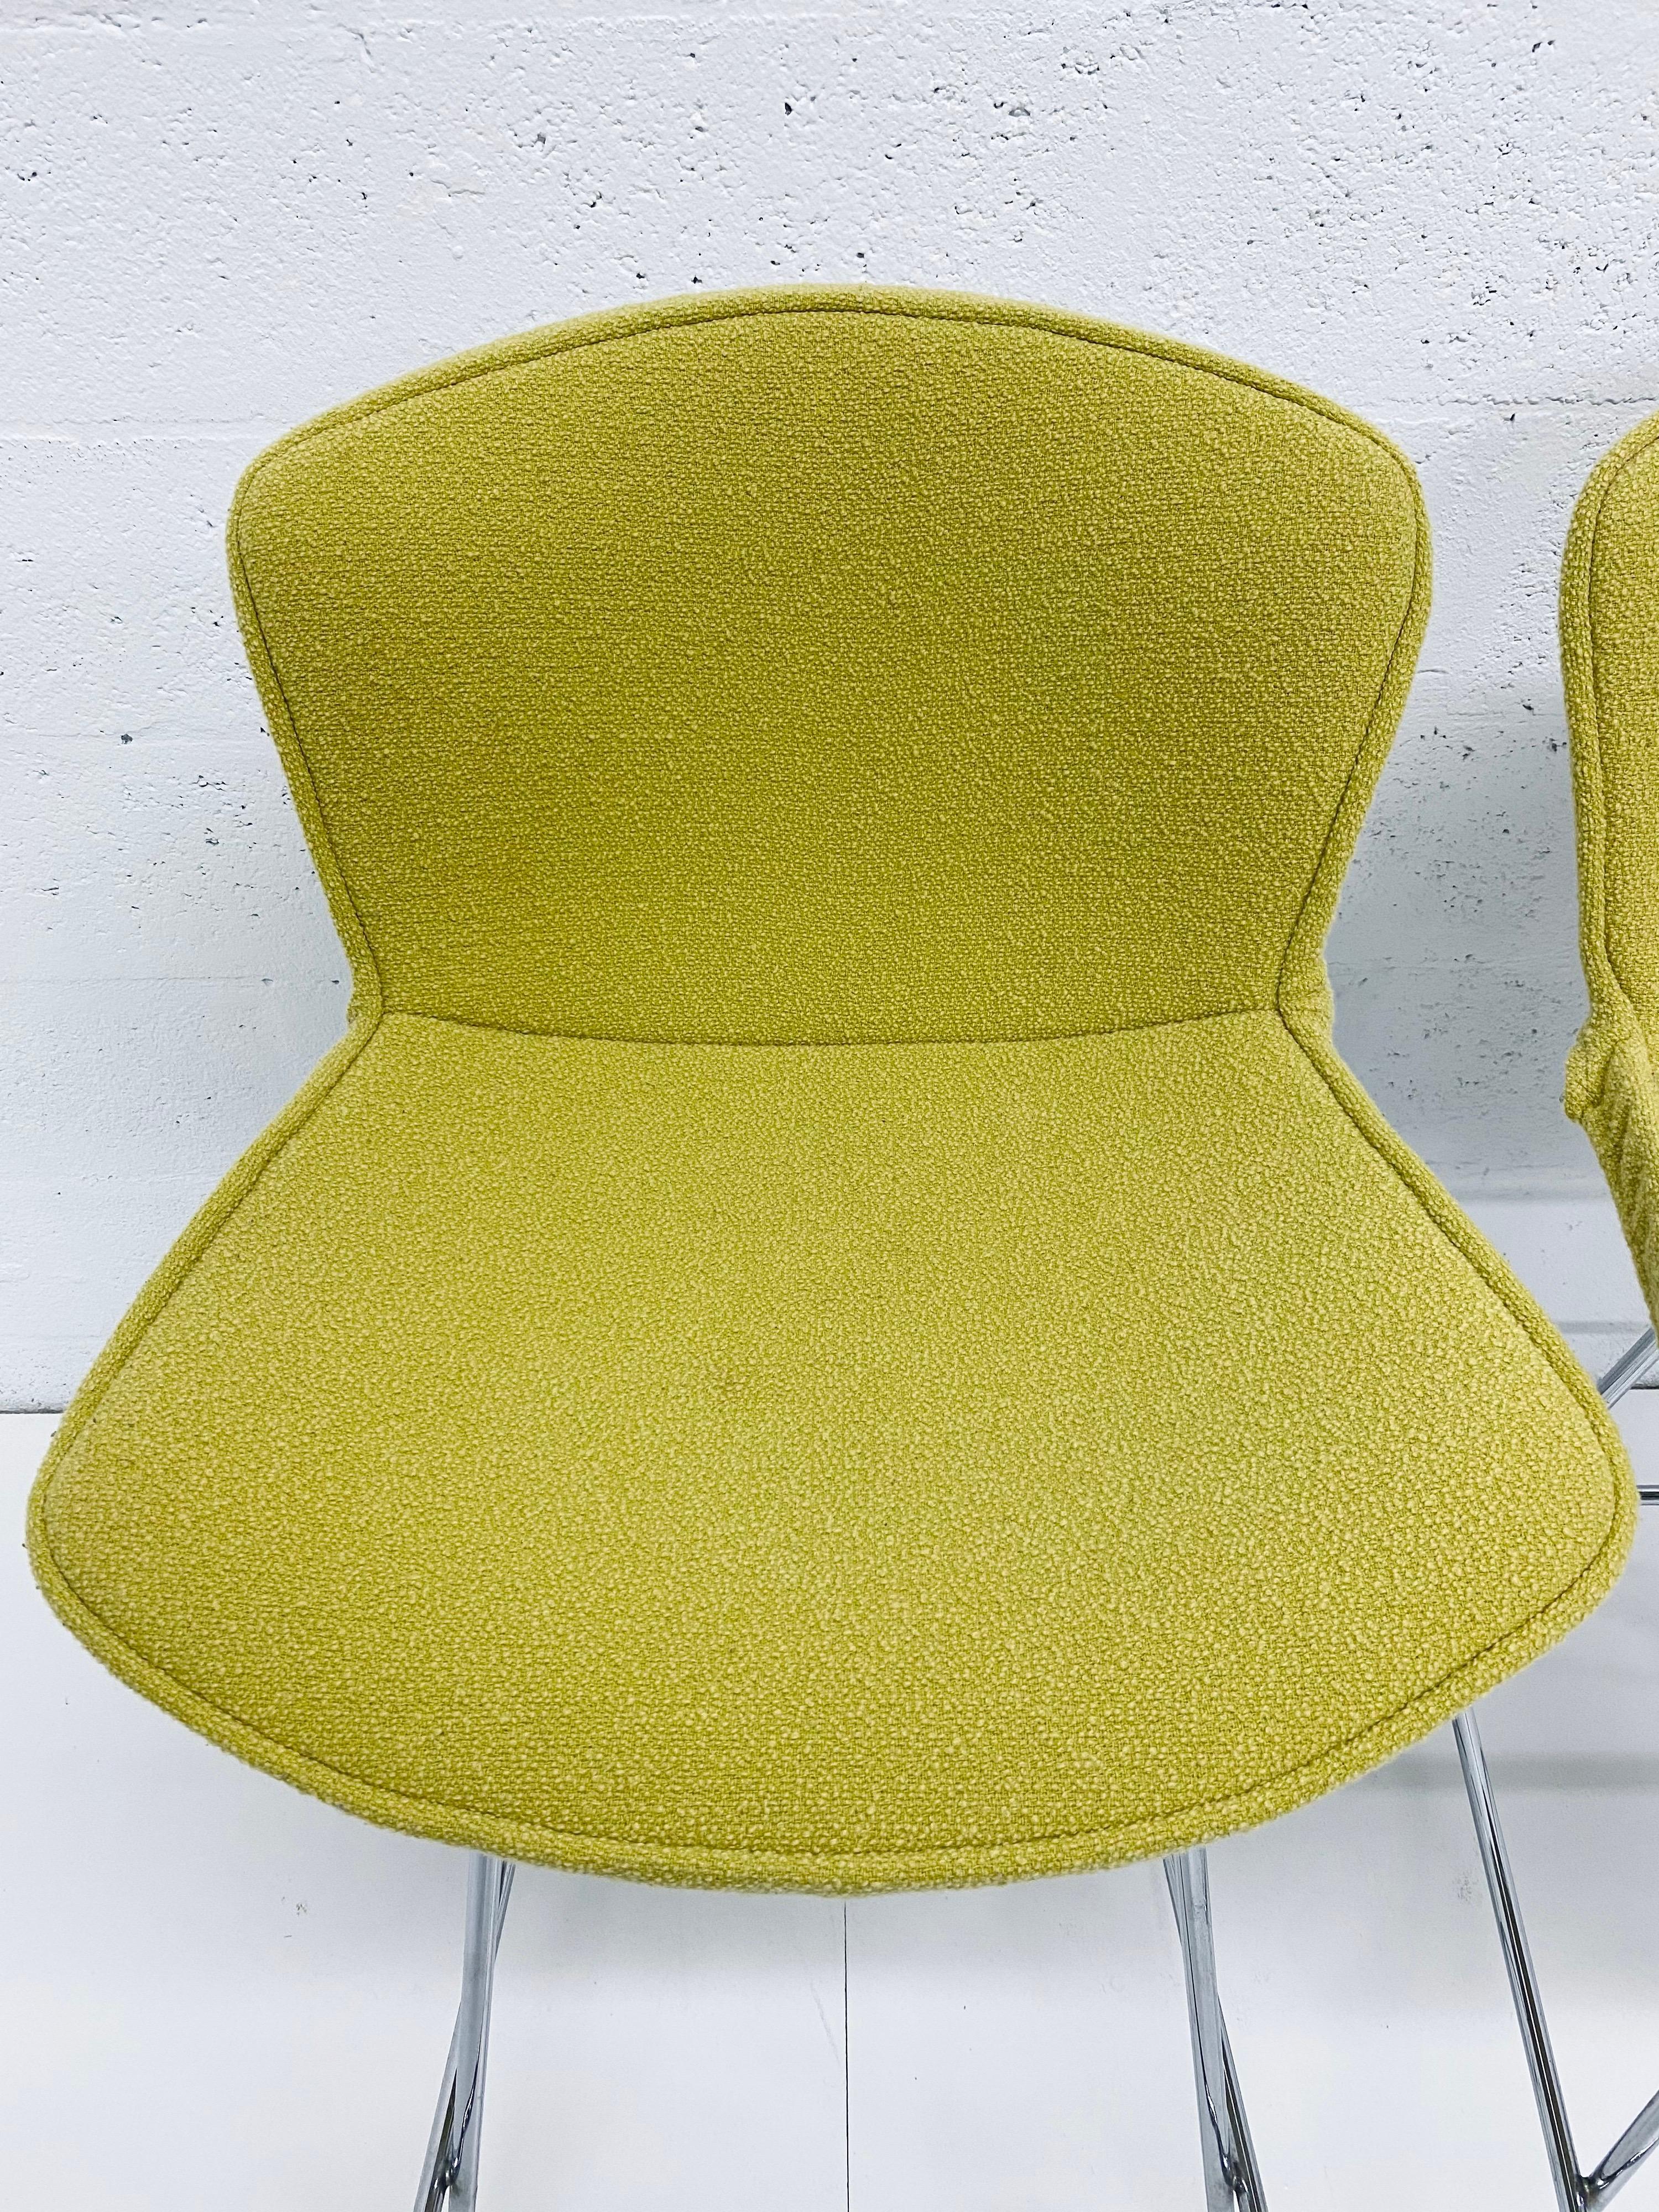 American Harry Bertoia Chrome Bar Stools with Citron Yellow Covers for Knoll, a Pair